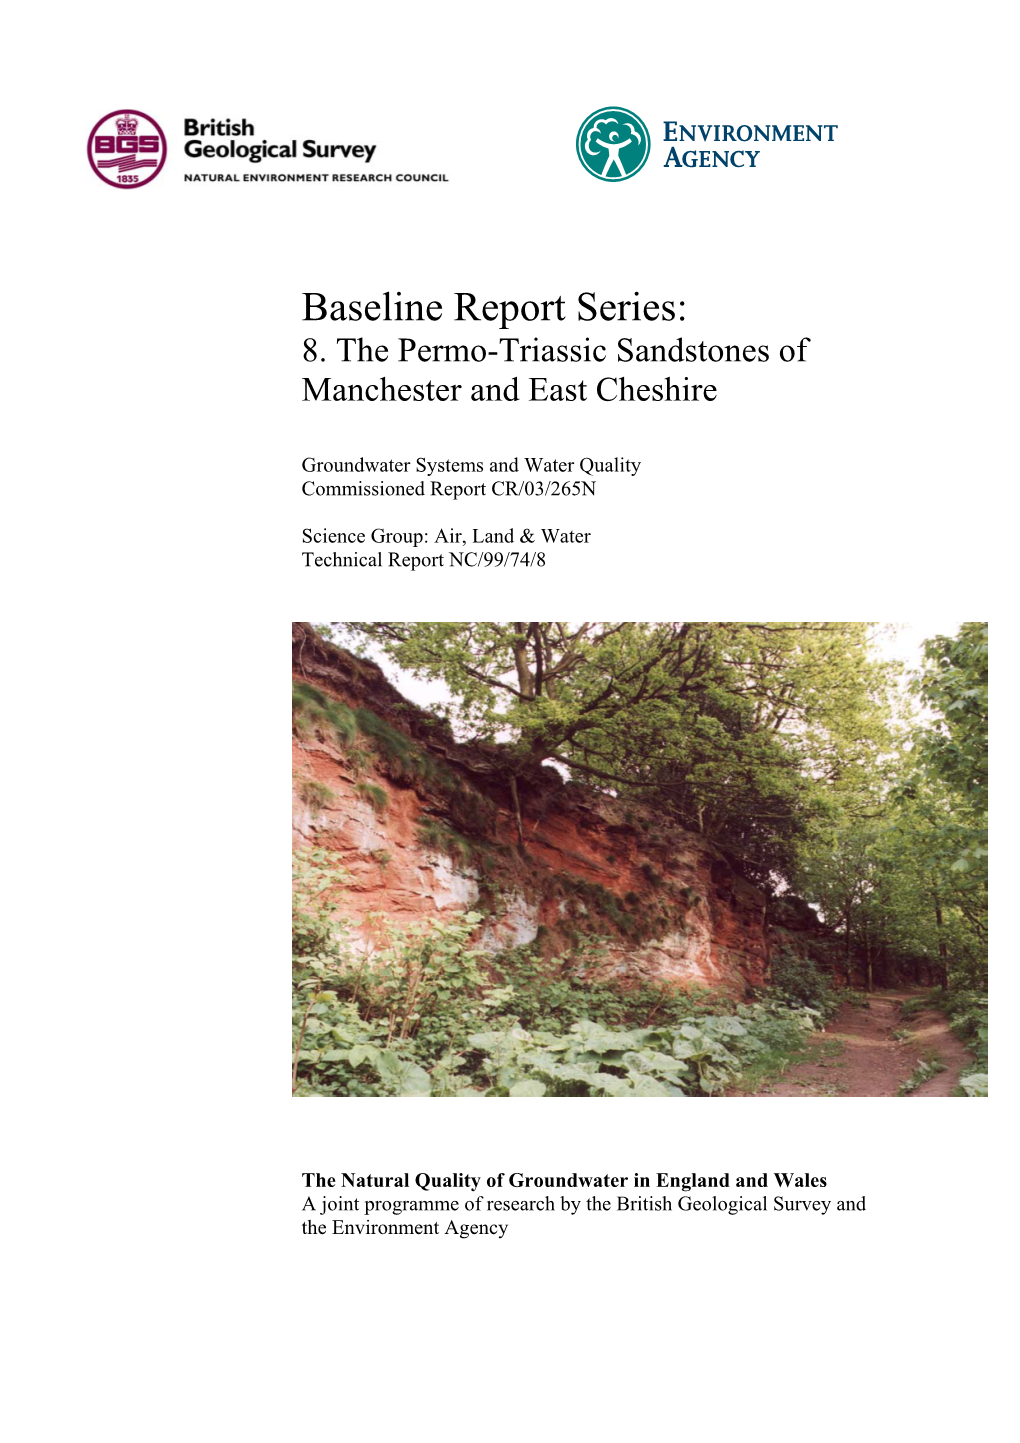 8. the Permo-Triassic Sandstones of Manchester and East Cheshire